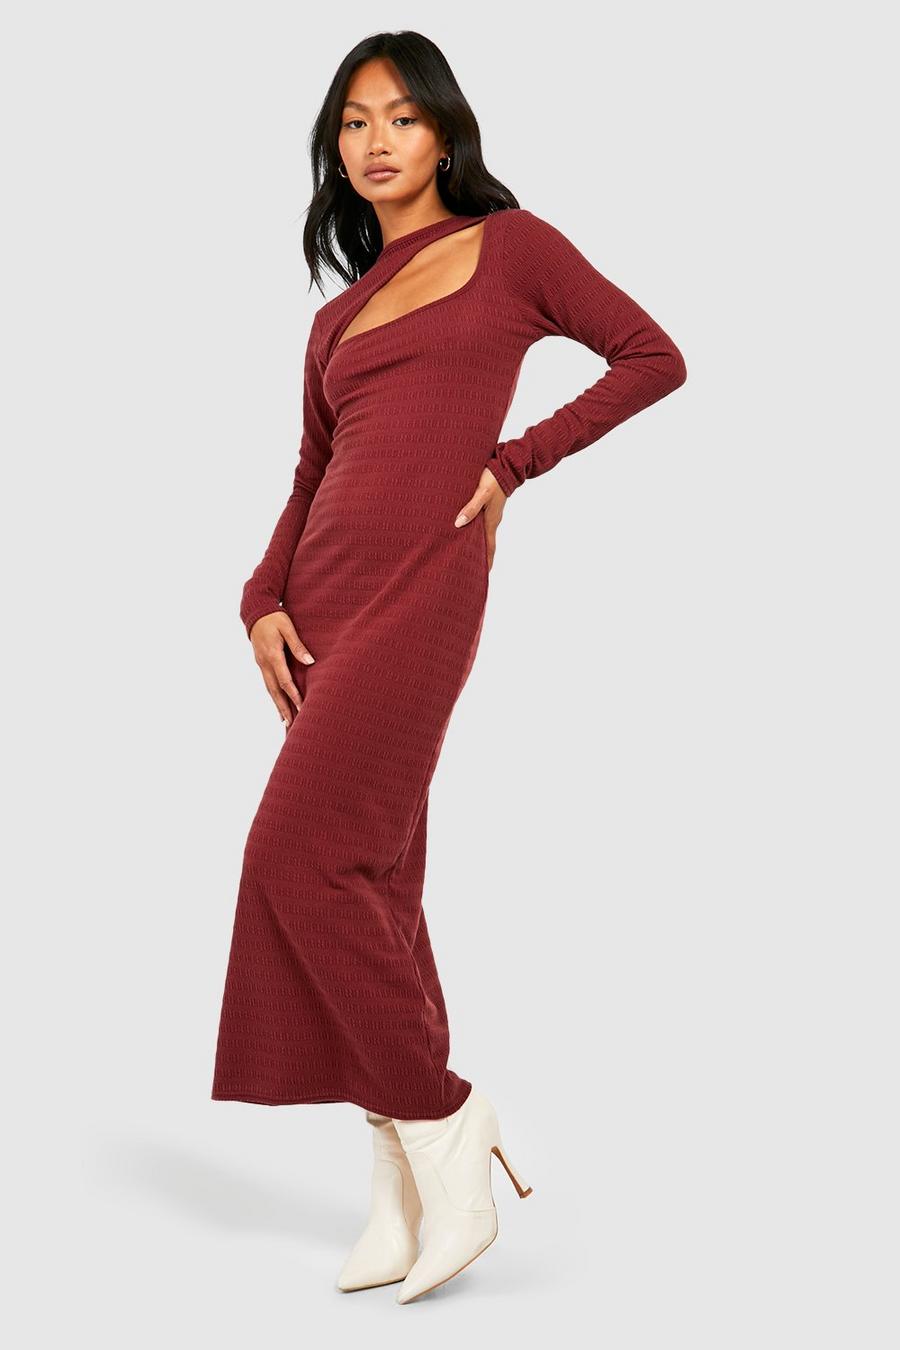 Burgundy red Soft Crinkle Texture Cut Out Midaxi Dress